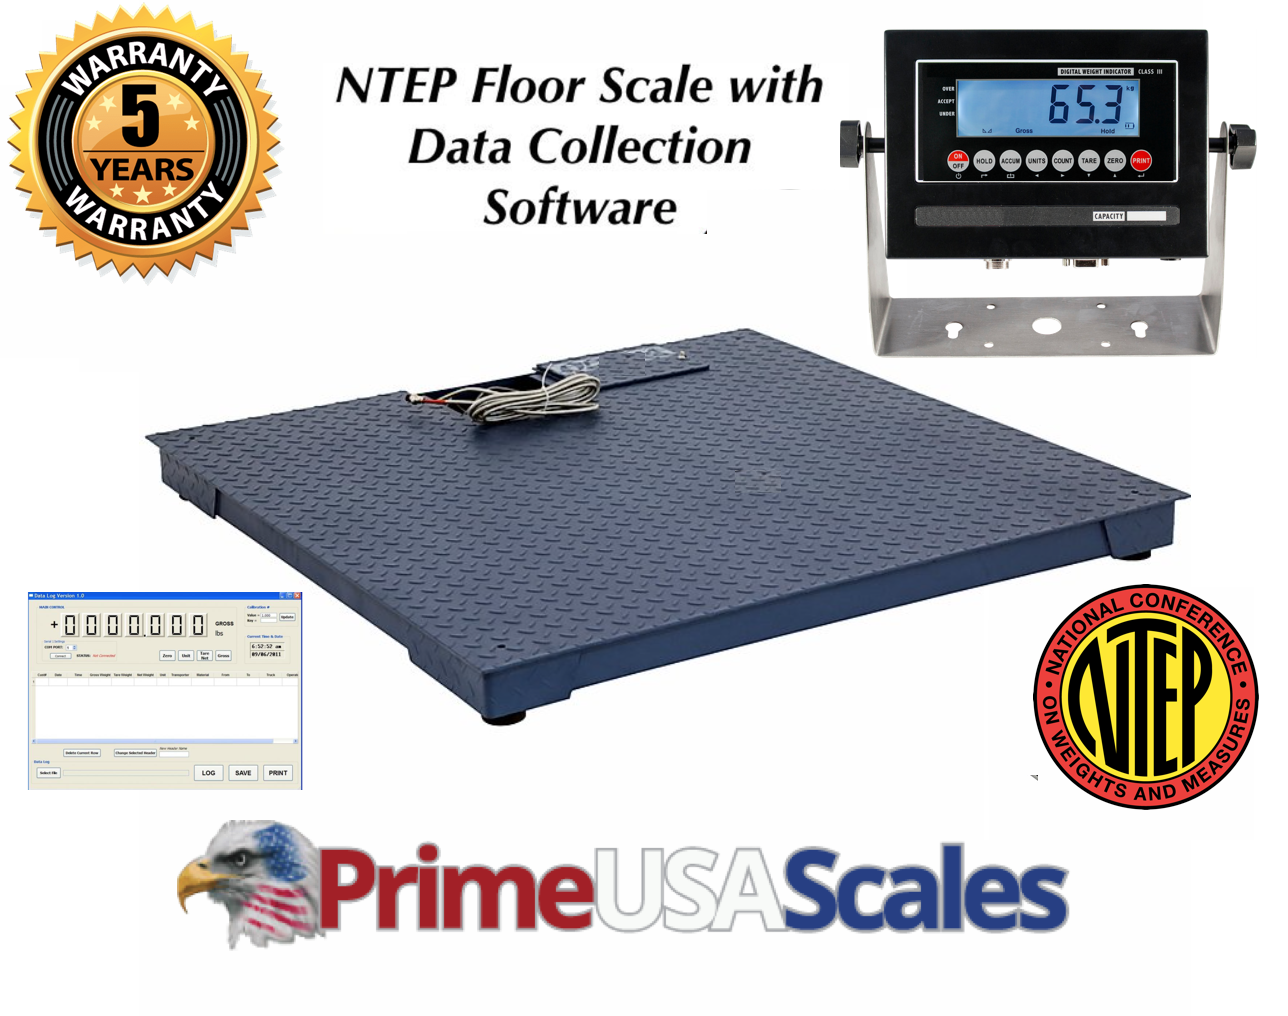 Primary image for 5 Year Warranty NTEP 60"x60" Floor scale 5,000 lb x 1 lb w/ Data Software